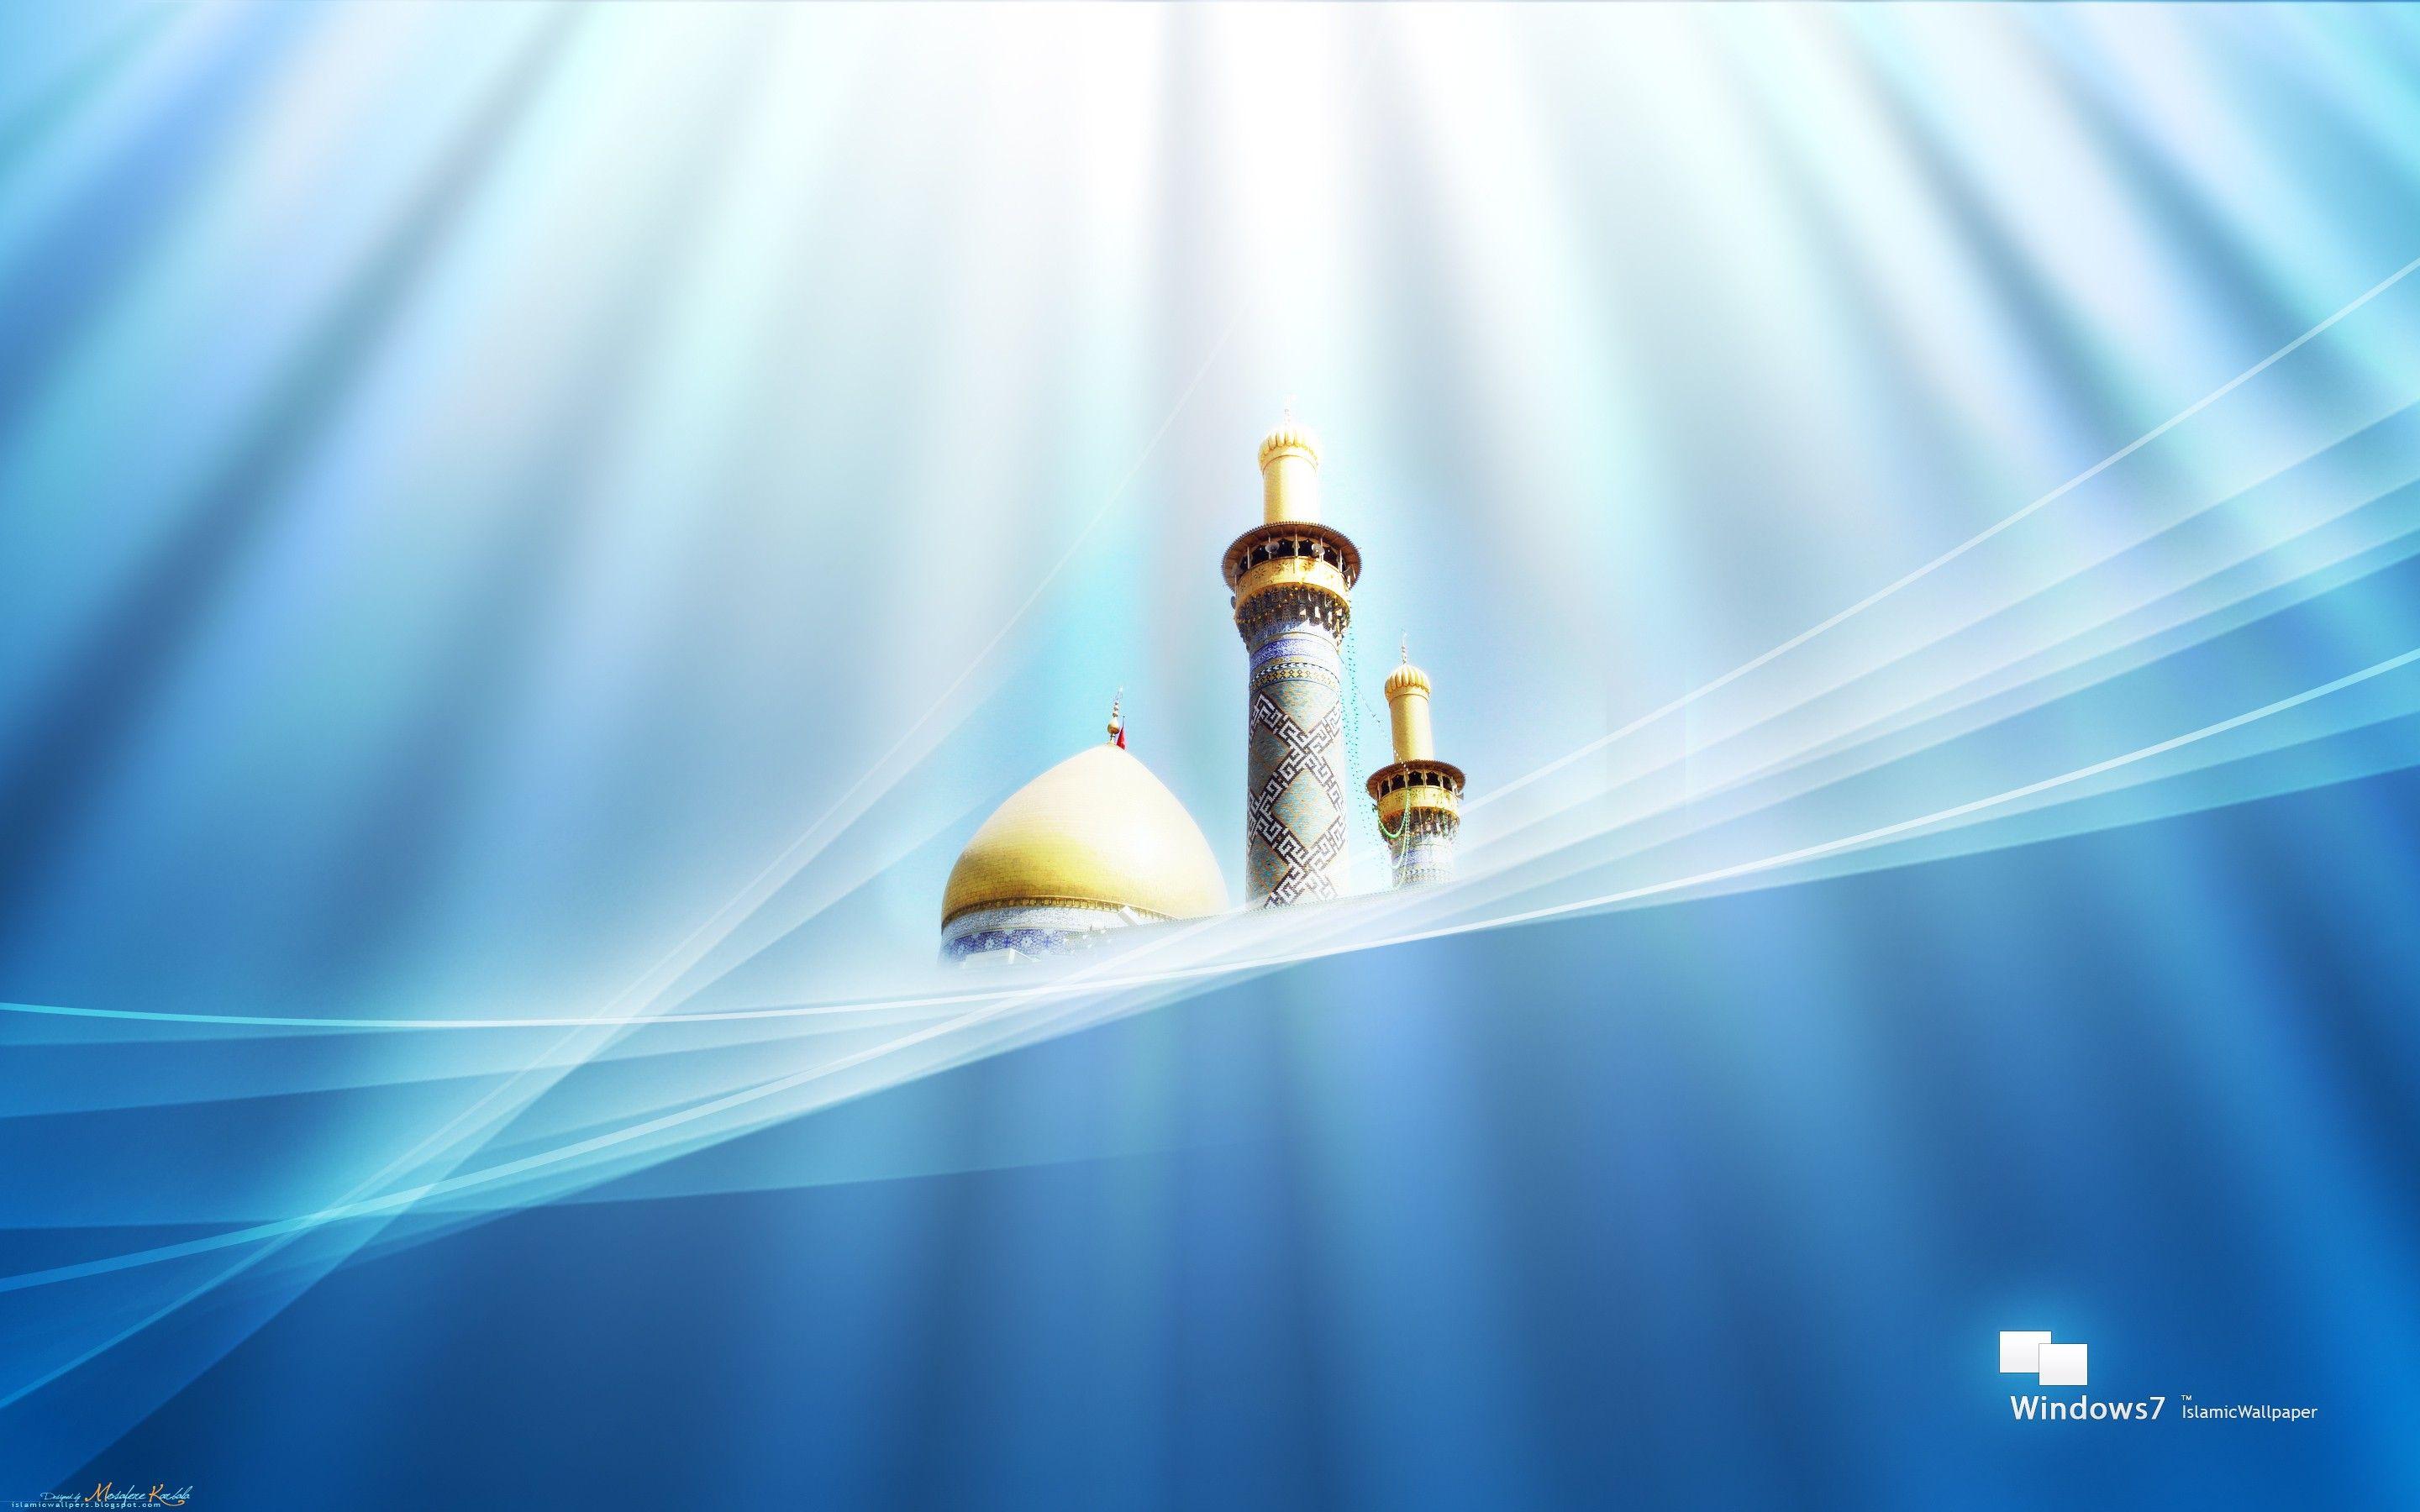 Islamic Backgrounds Image Wallpaper Cave